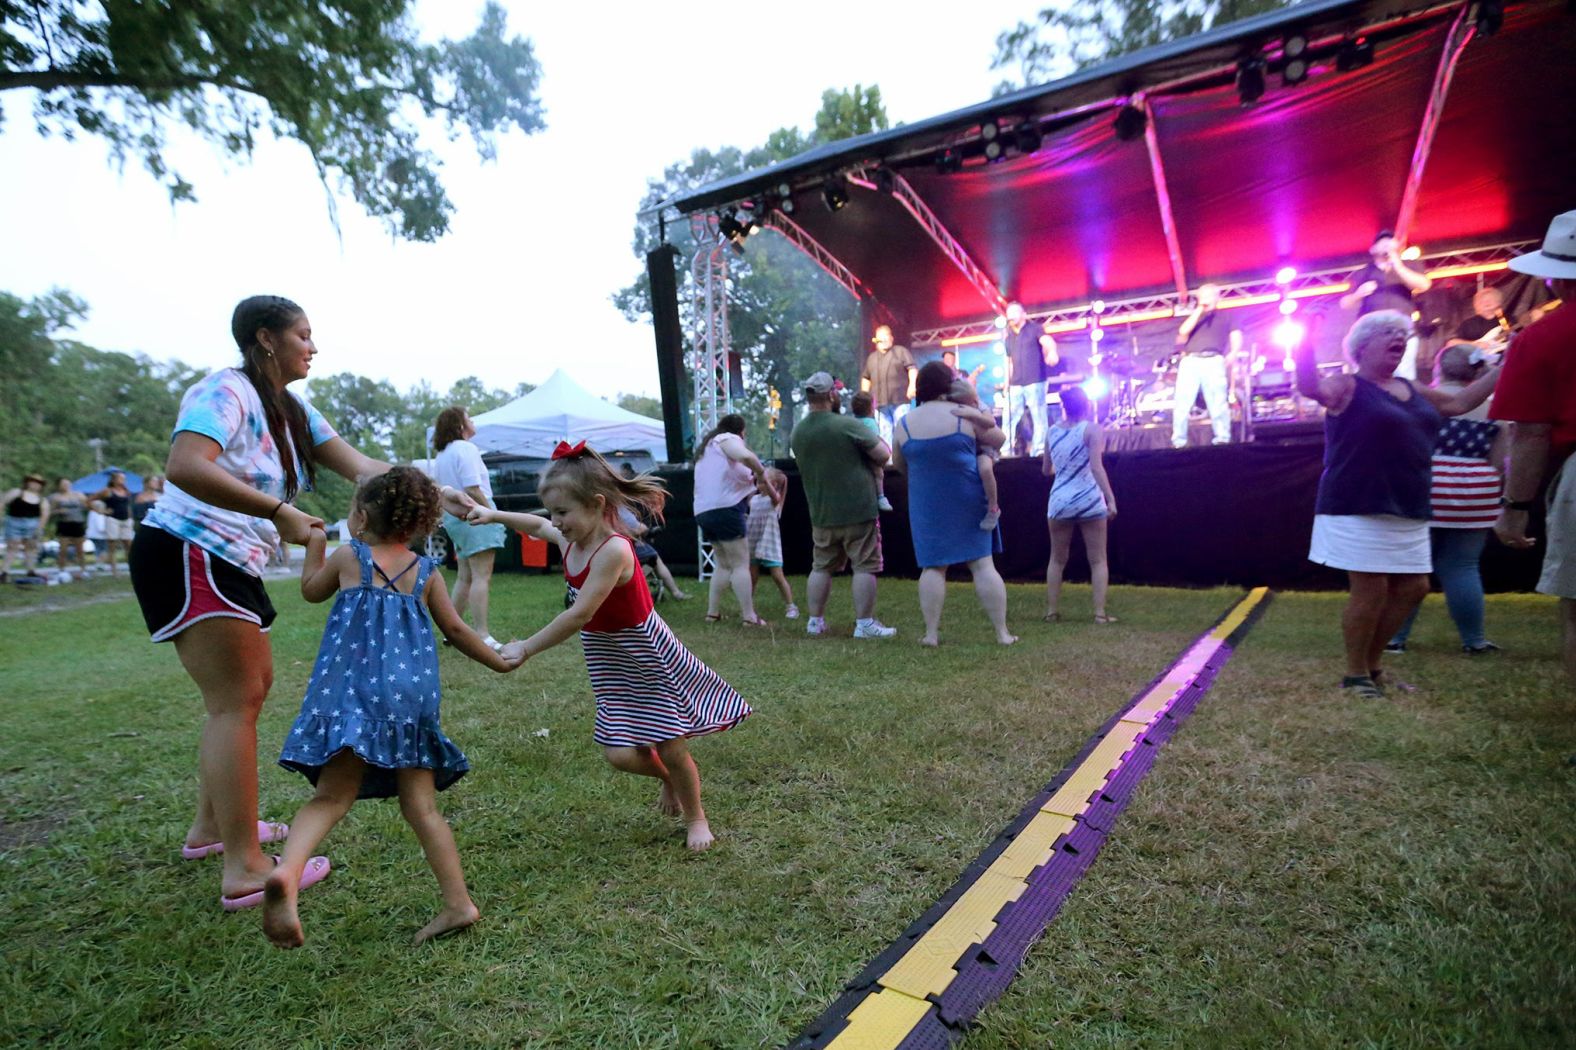 Festivalgoers dance at an Independence Day celebration in Richmond Hill, Georgia, on Saturday.